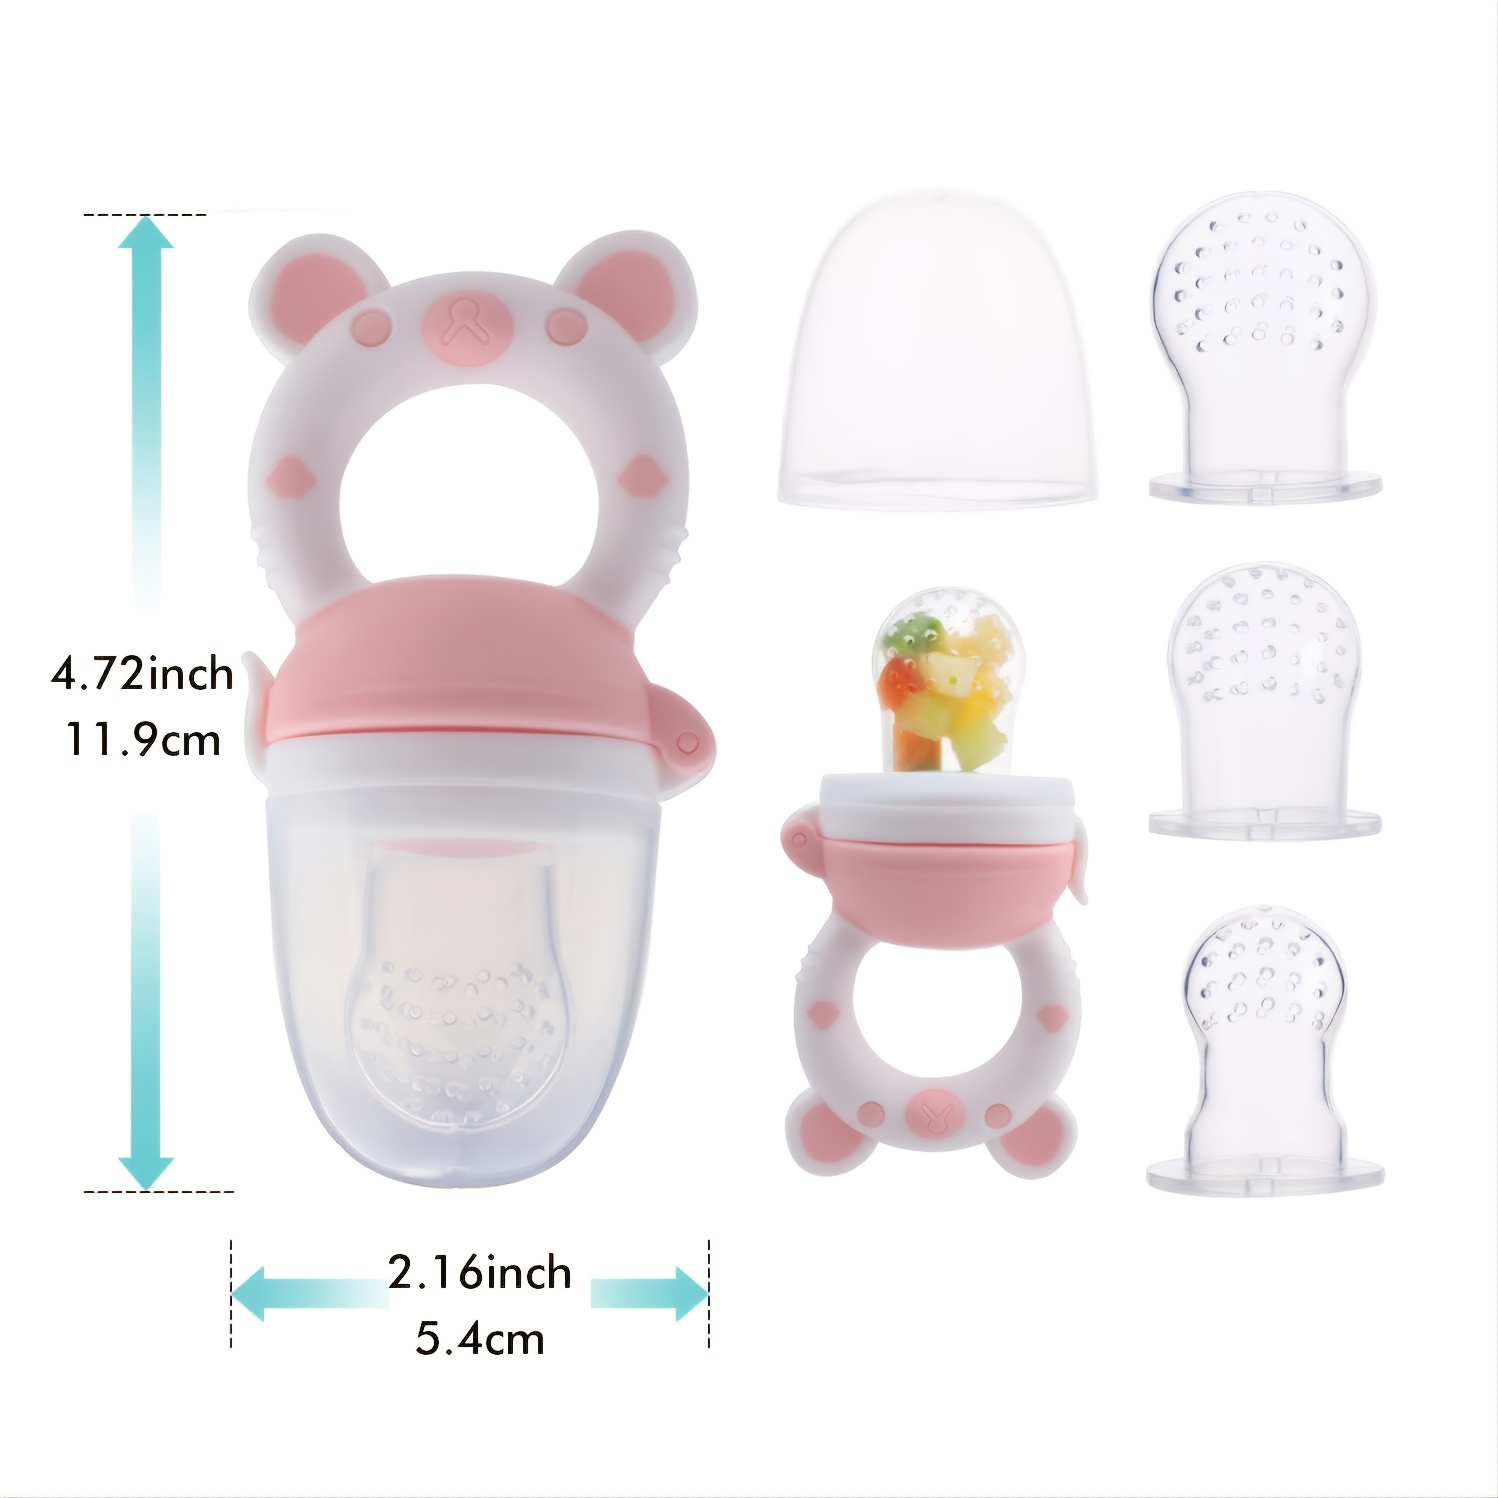 Teether Baby Feeding Set, Silicone Feeding Bottle With Spoon, Squeeze Baby  Food Dispensing Spoon Feeder, Fresh Food Feeder Pacifier, Strawberry  Teether, Pacifier Chain Clips Holder, 3-size Nipples, Halloween,  Thanksgiving, Christmas Gift 